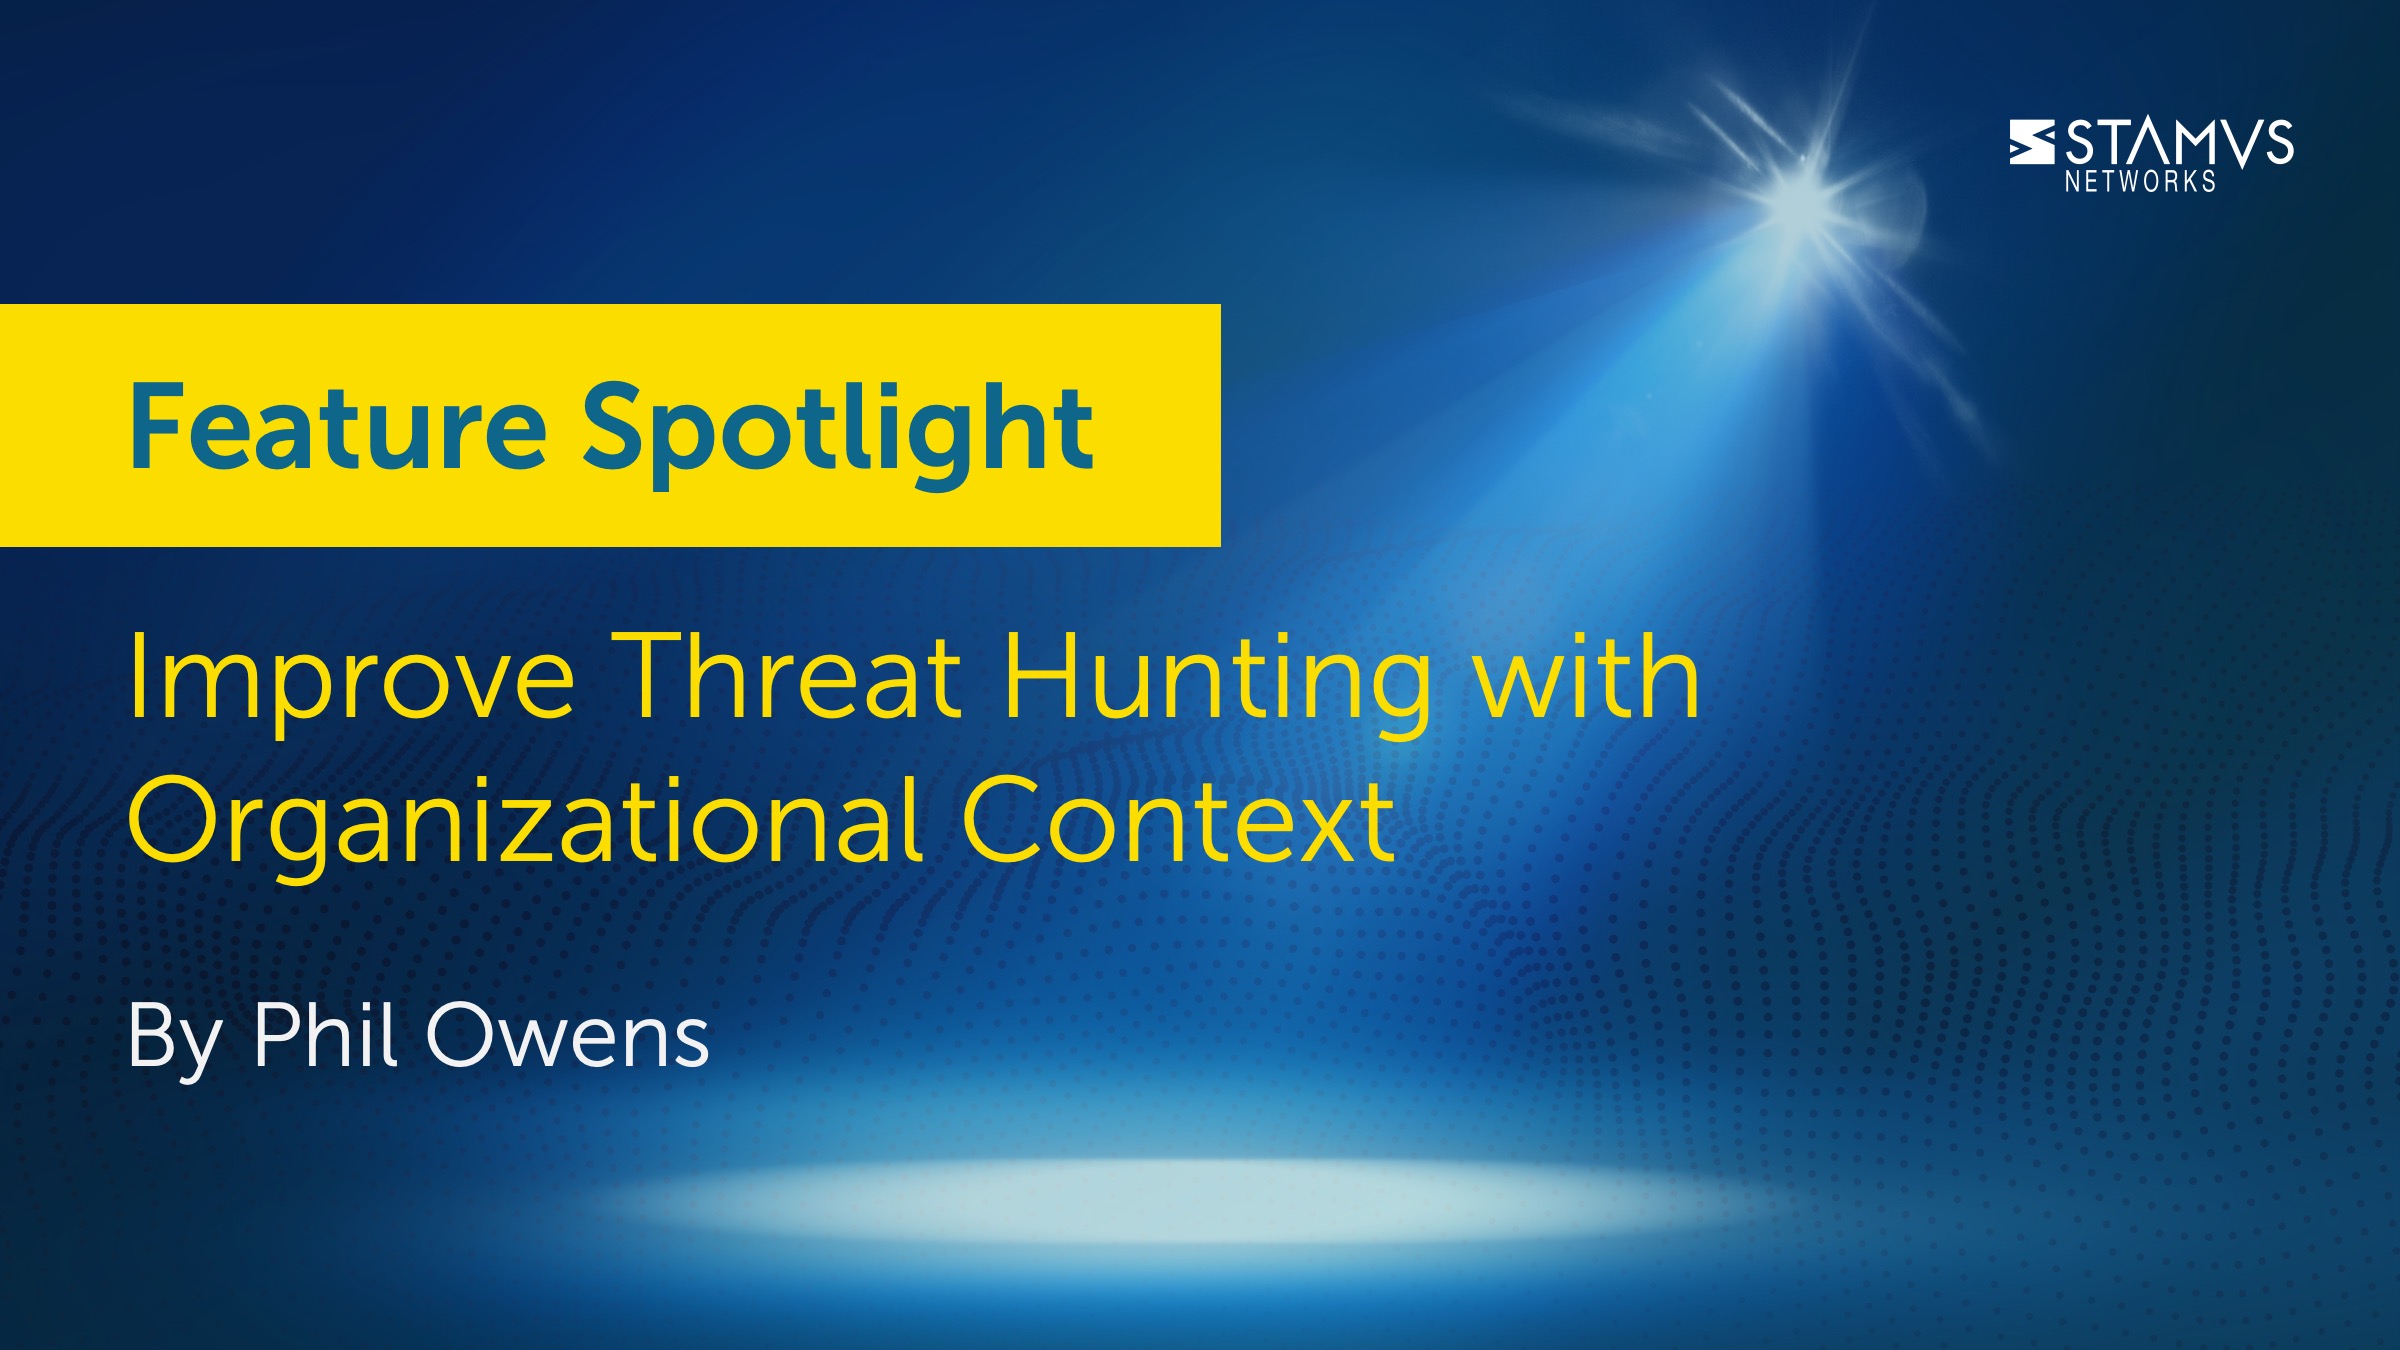 Feature Spotlight: Improve Threat Hunting with Organizational Context by Phil Owens